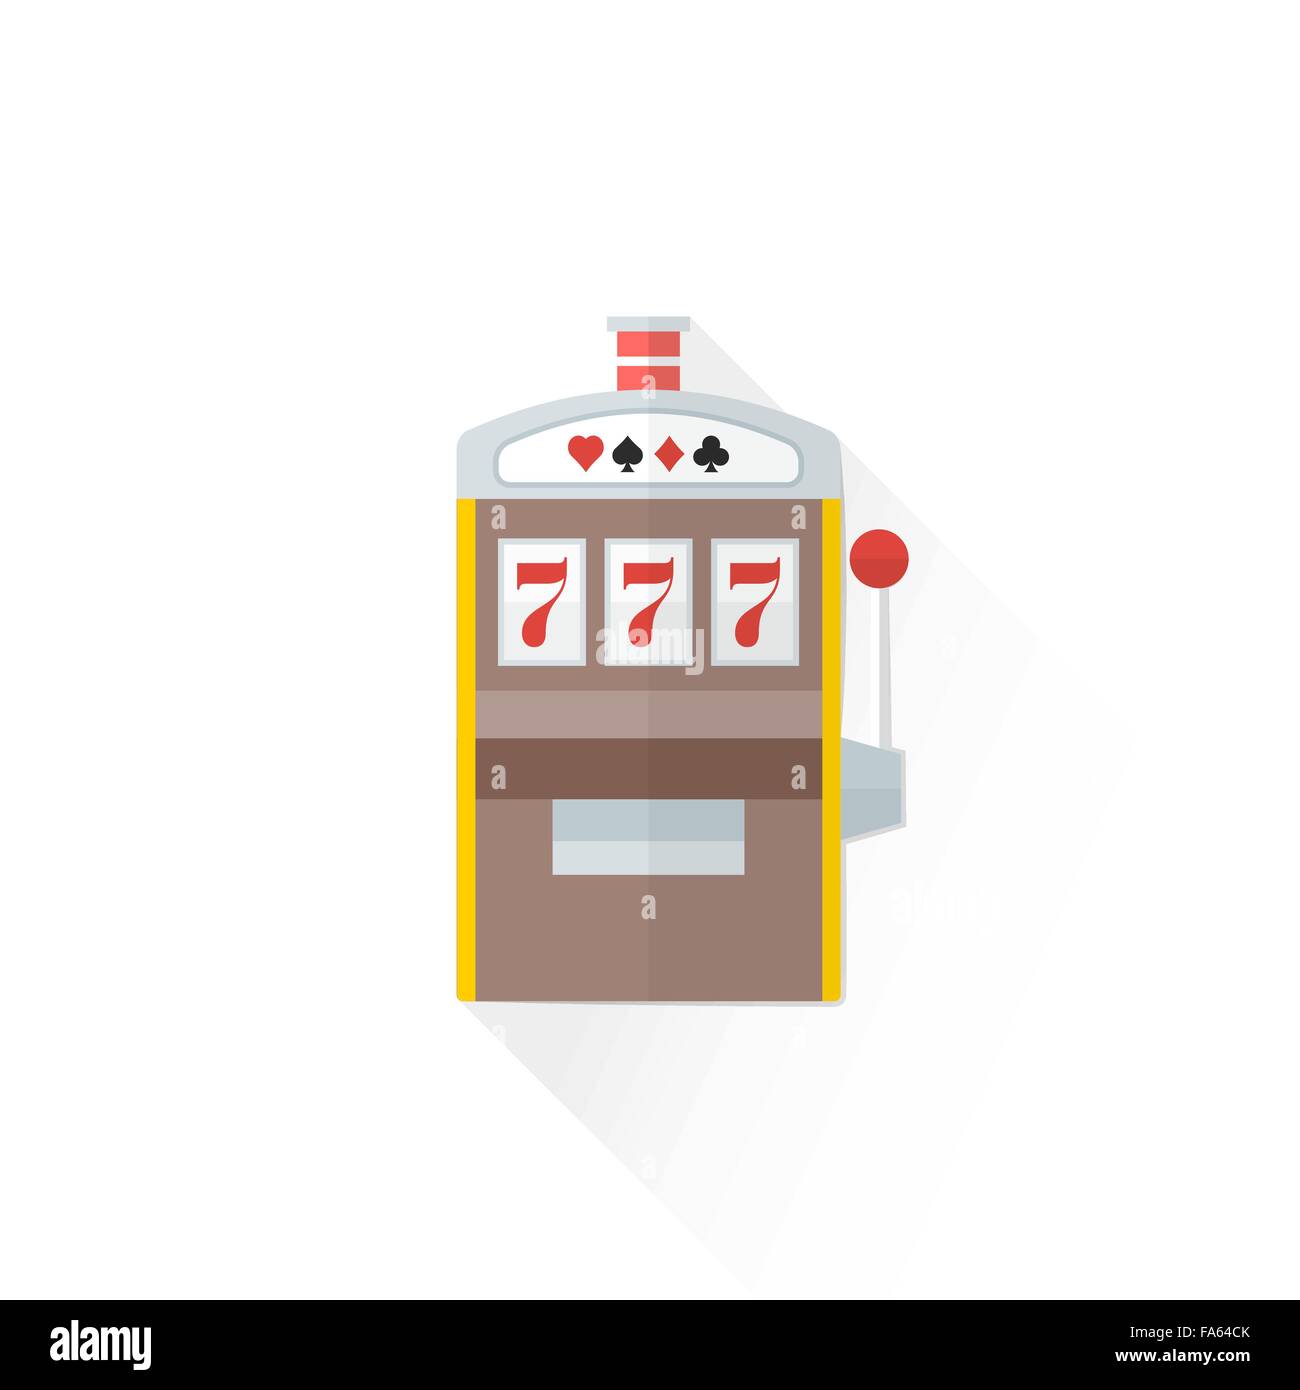 vector gambling slot machine winner triple sevens isolated flat design illustration on white background with shadow Stock Vector